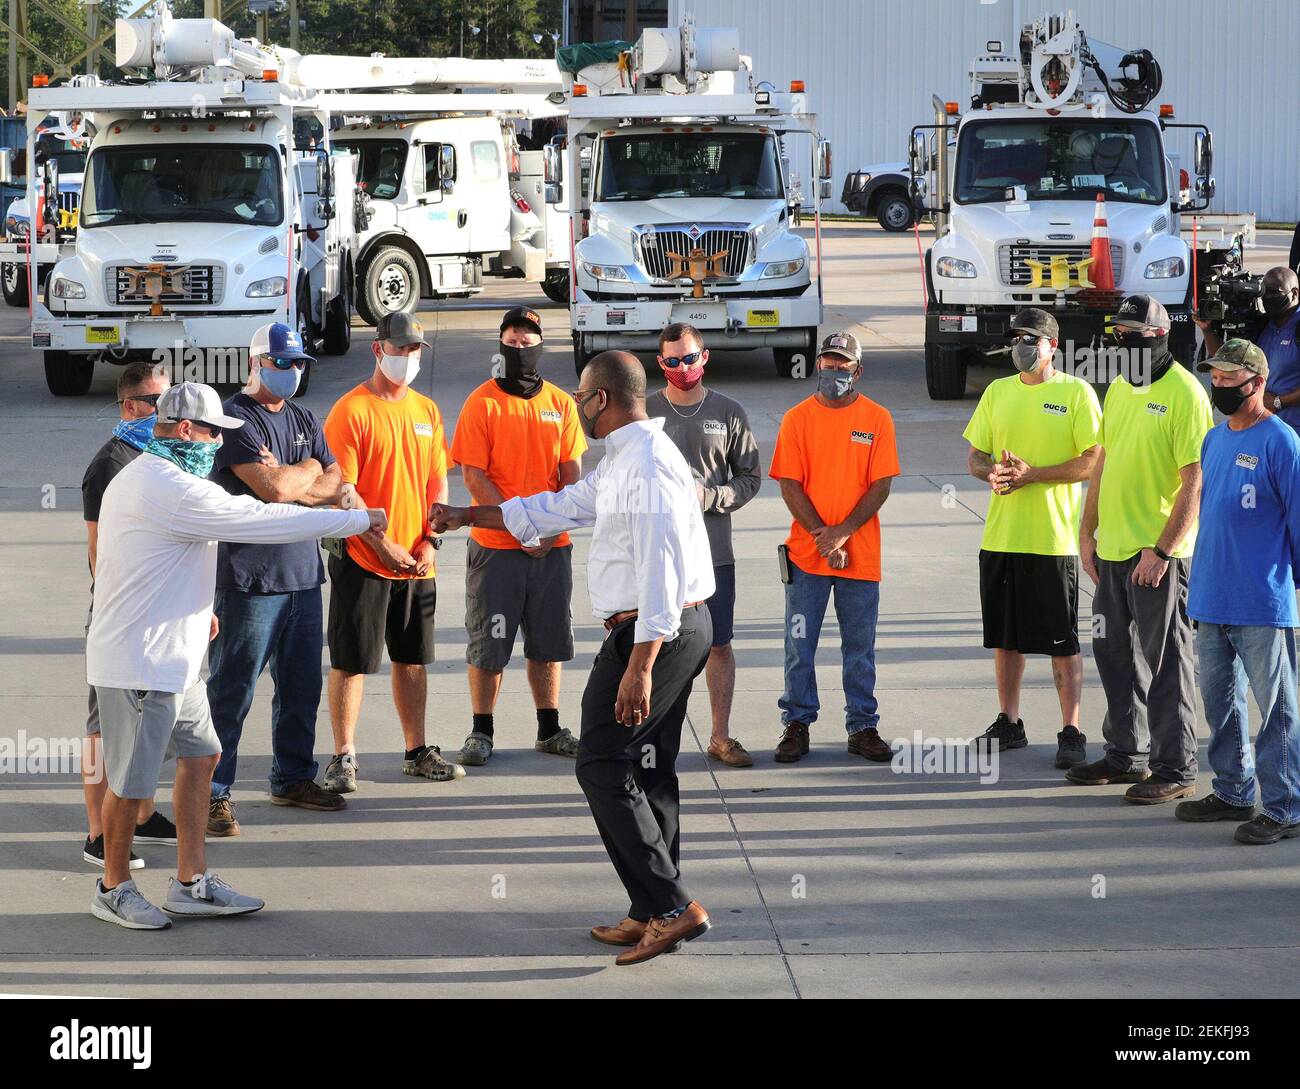 Orlando Utilities Commission vice president LeMoyne Adams, center, thanks lineworkers during a meeting before their departure from OUC's Pershing Operations Center in Orlando, Fla. for Lafayette, La., Thursday, Aug. 27, 2020. A dozen OUC workers volunteered to assist with power restoration efforts in the wake of the devastation from Hurricane Laura that struck the Louisiana coastline Thursday morning. The lineworkers will join up with other municipal utilities from across the U.S. as a part of a coordinated mutual aid response to the category 4 hurricane. (Photo by Joe Burbank/Orlando Sentinel Stock Photo